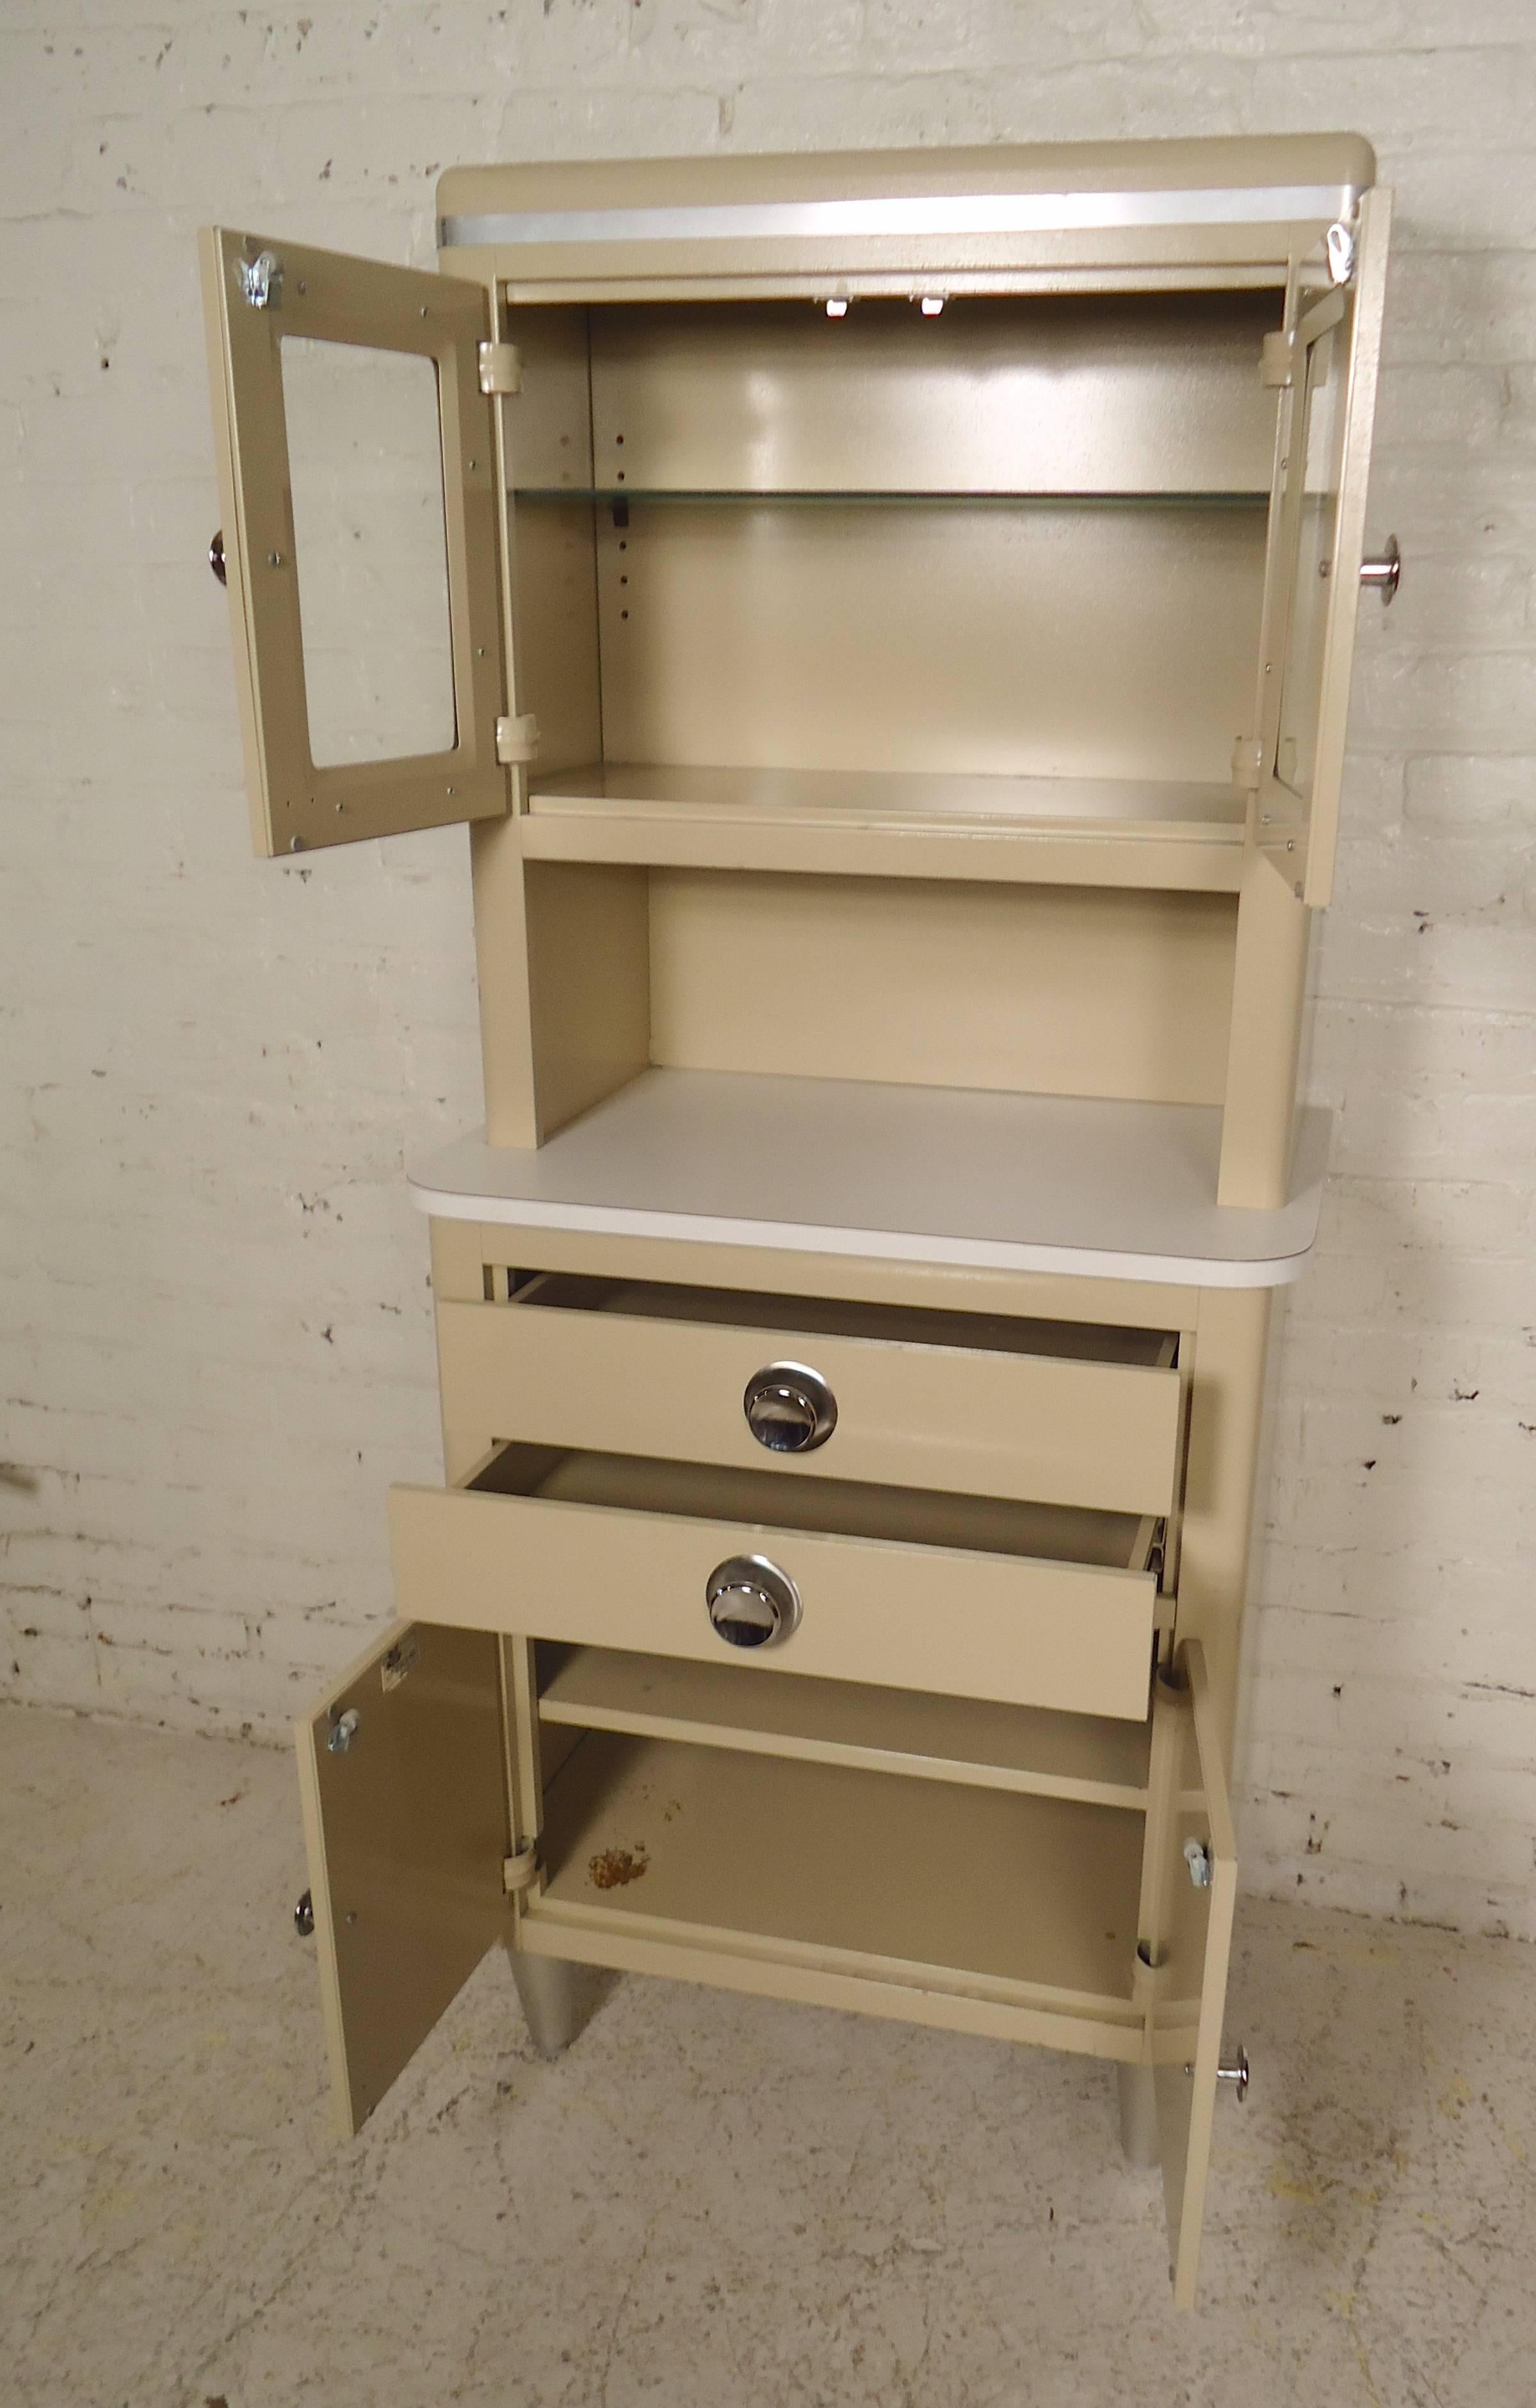 Examination room storage cabinet in great original condition. Glass door cabinet, drawers and lower cabinet storage. Polished chrome handles, tapered legs. Makes an attractive bathroom or kitchen storage unit.

(Please confirm item location - NY